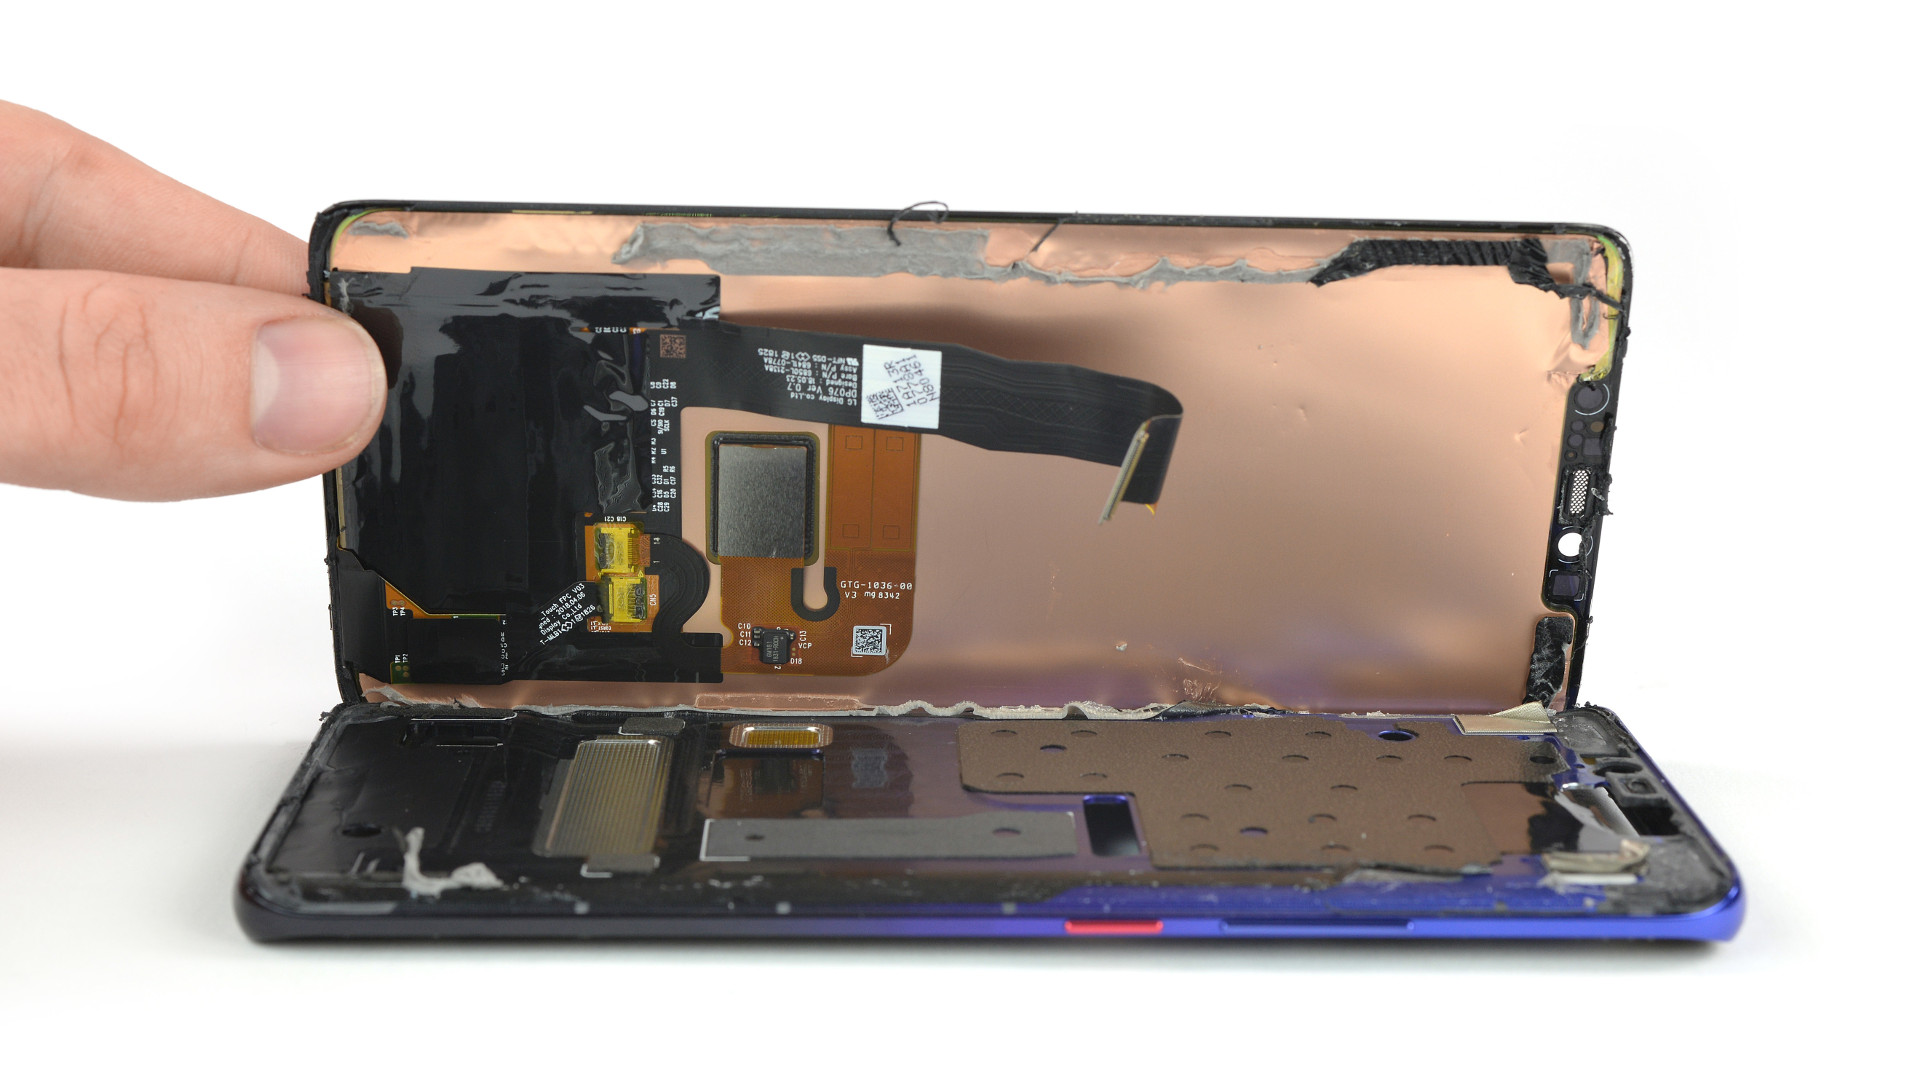 The Huawei Mate 20 Pro with its display detached from the body.